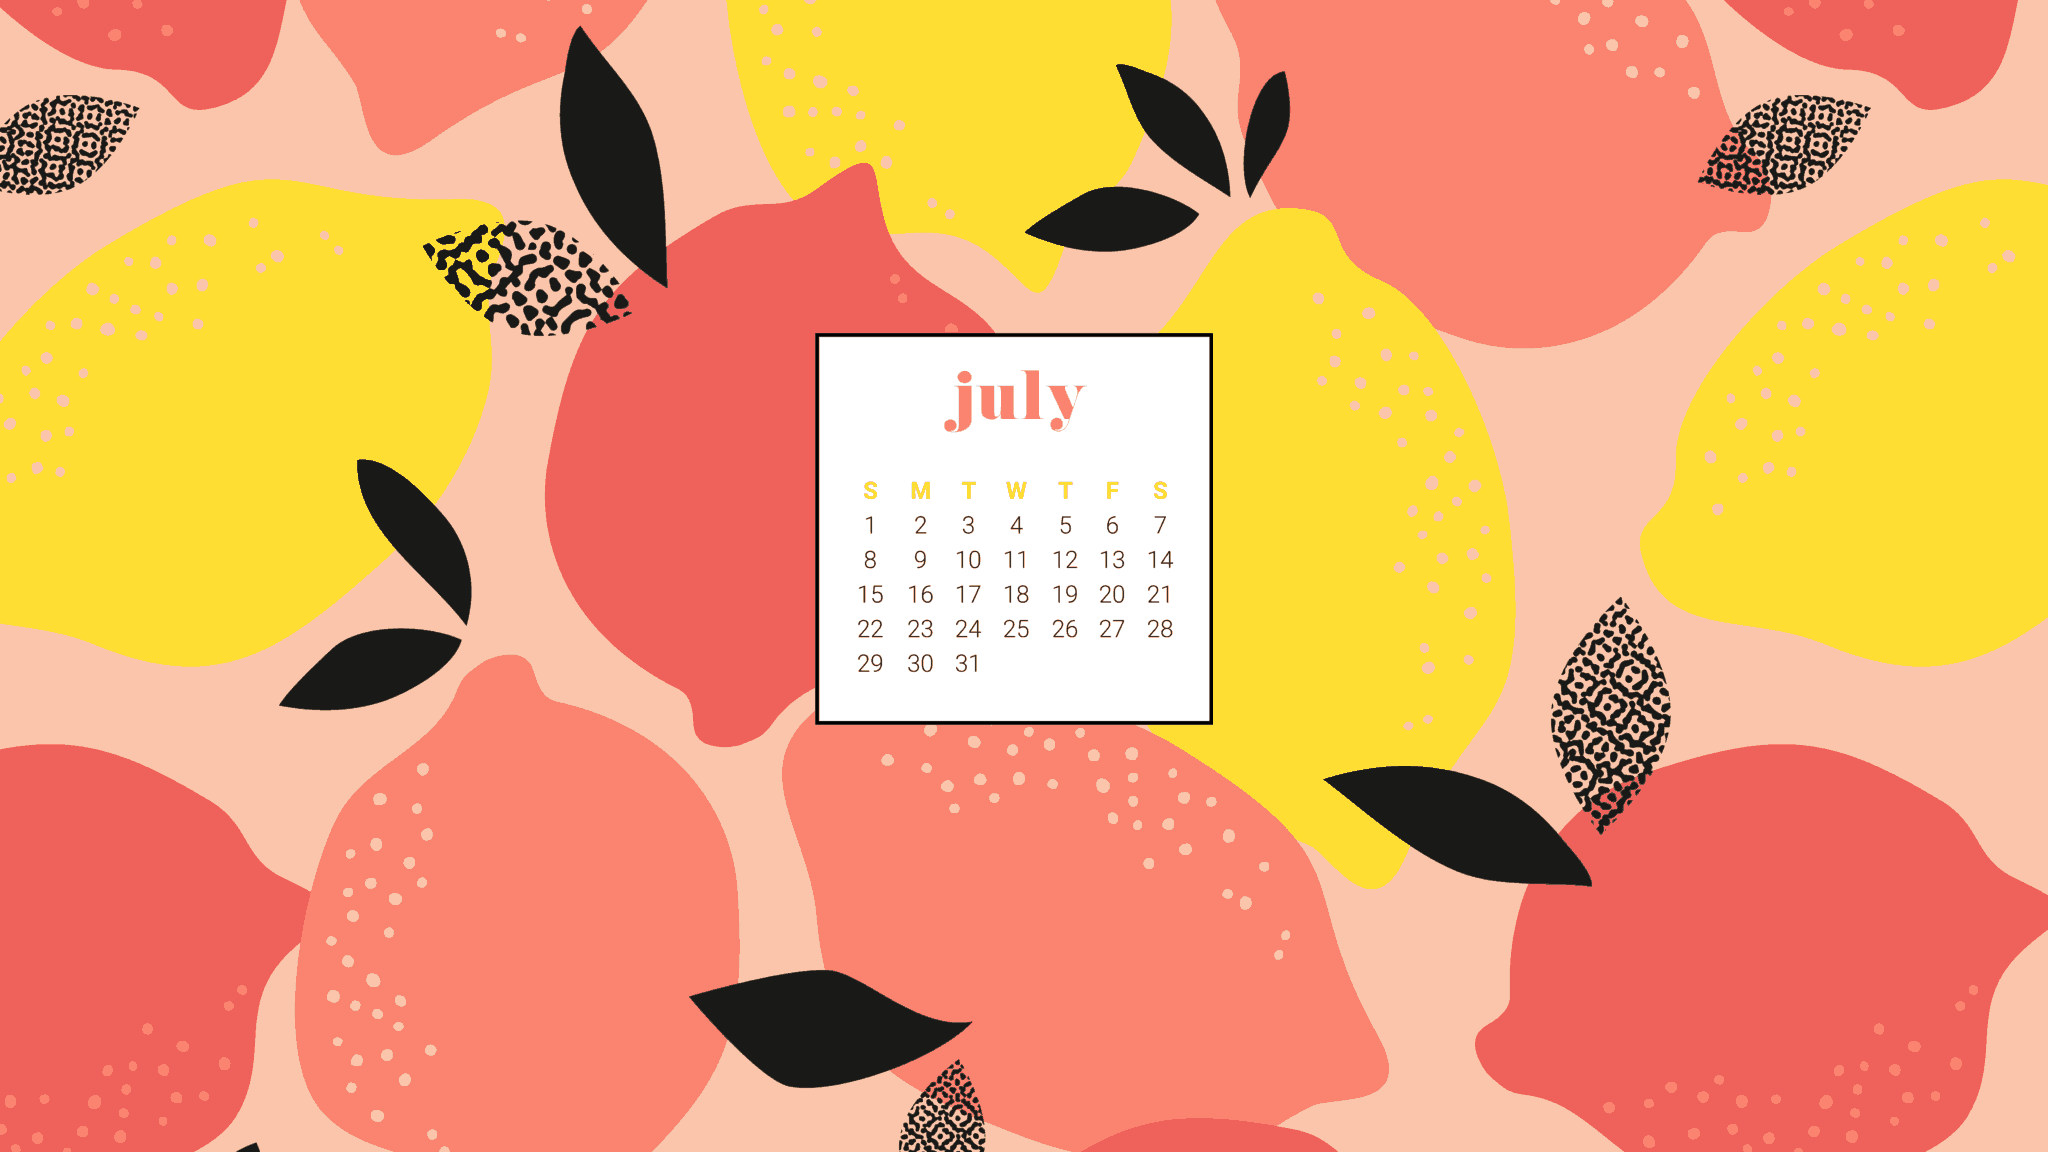 Download your summery and FREE July 2018 calendar wallpaper